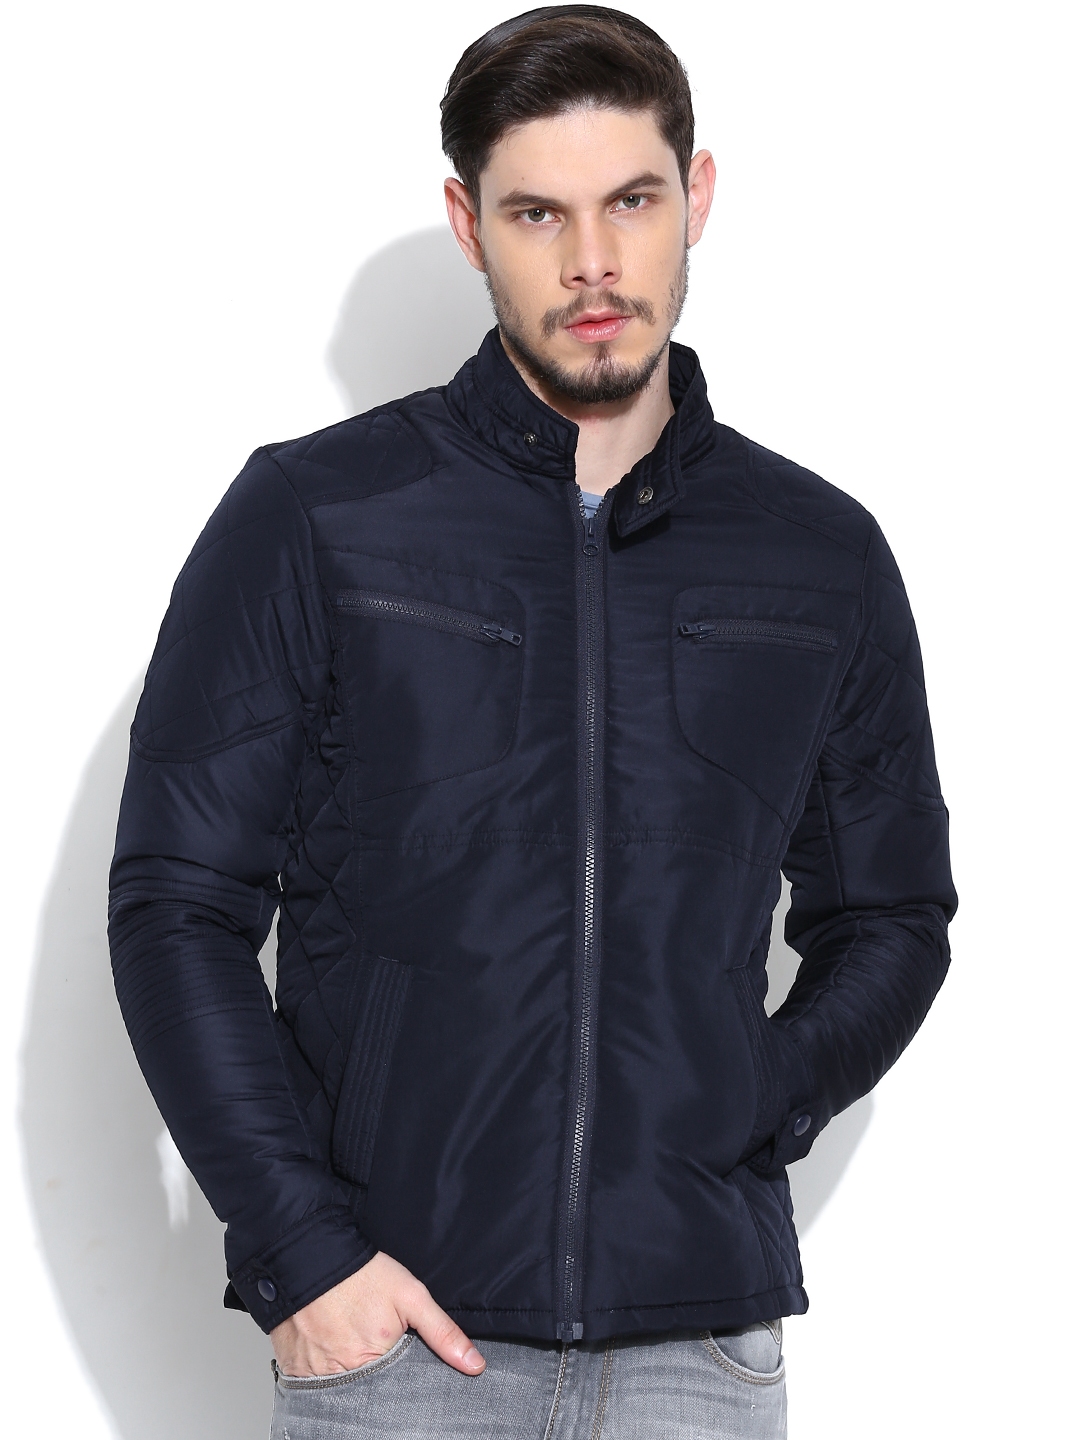 Buy Flying Machine Navy Panelled Jacket - Jackets for Men 1003727 | Myntra